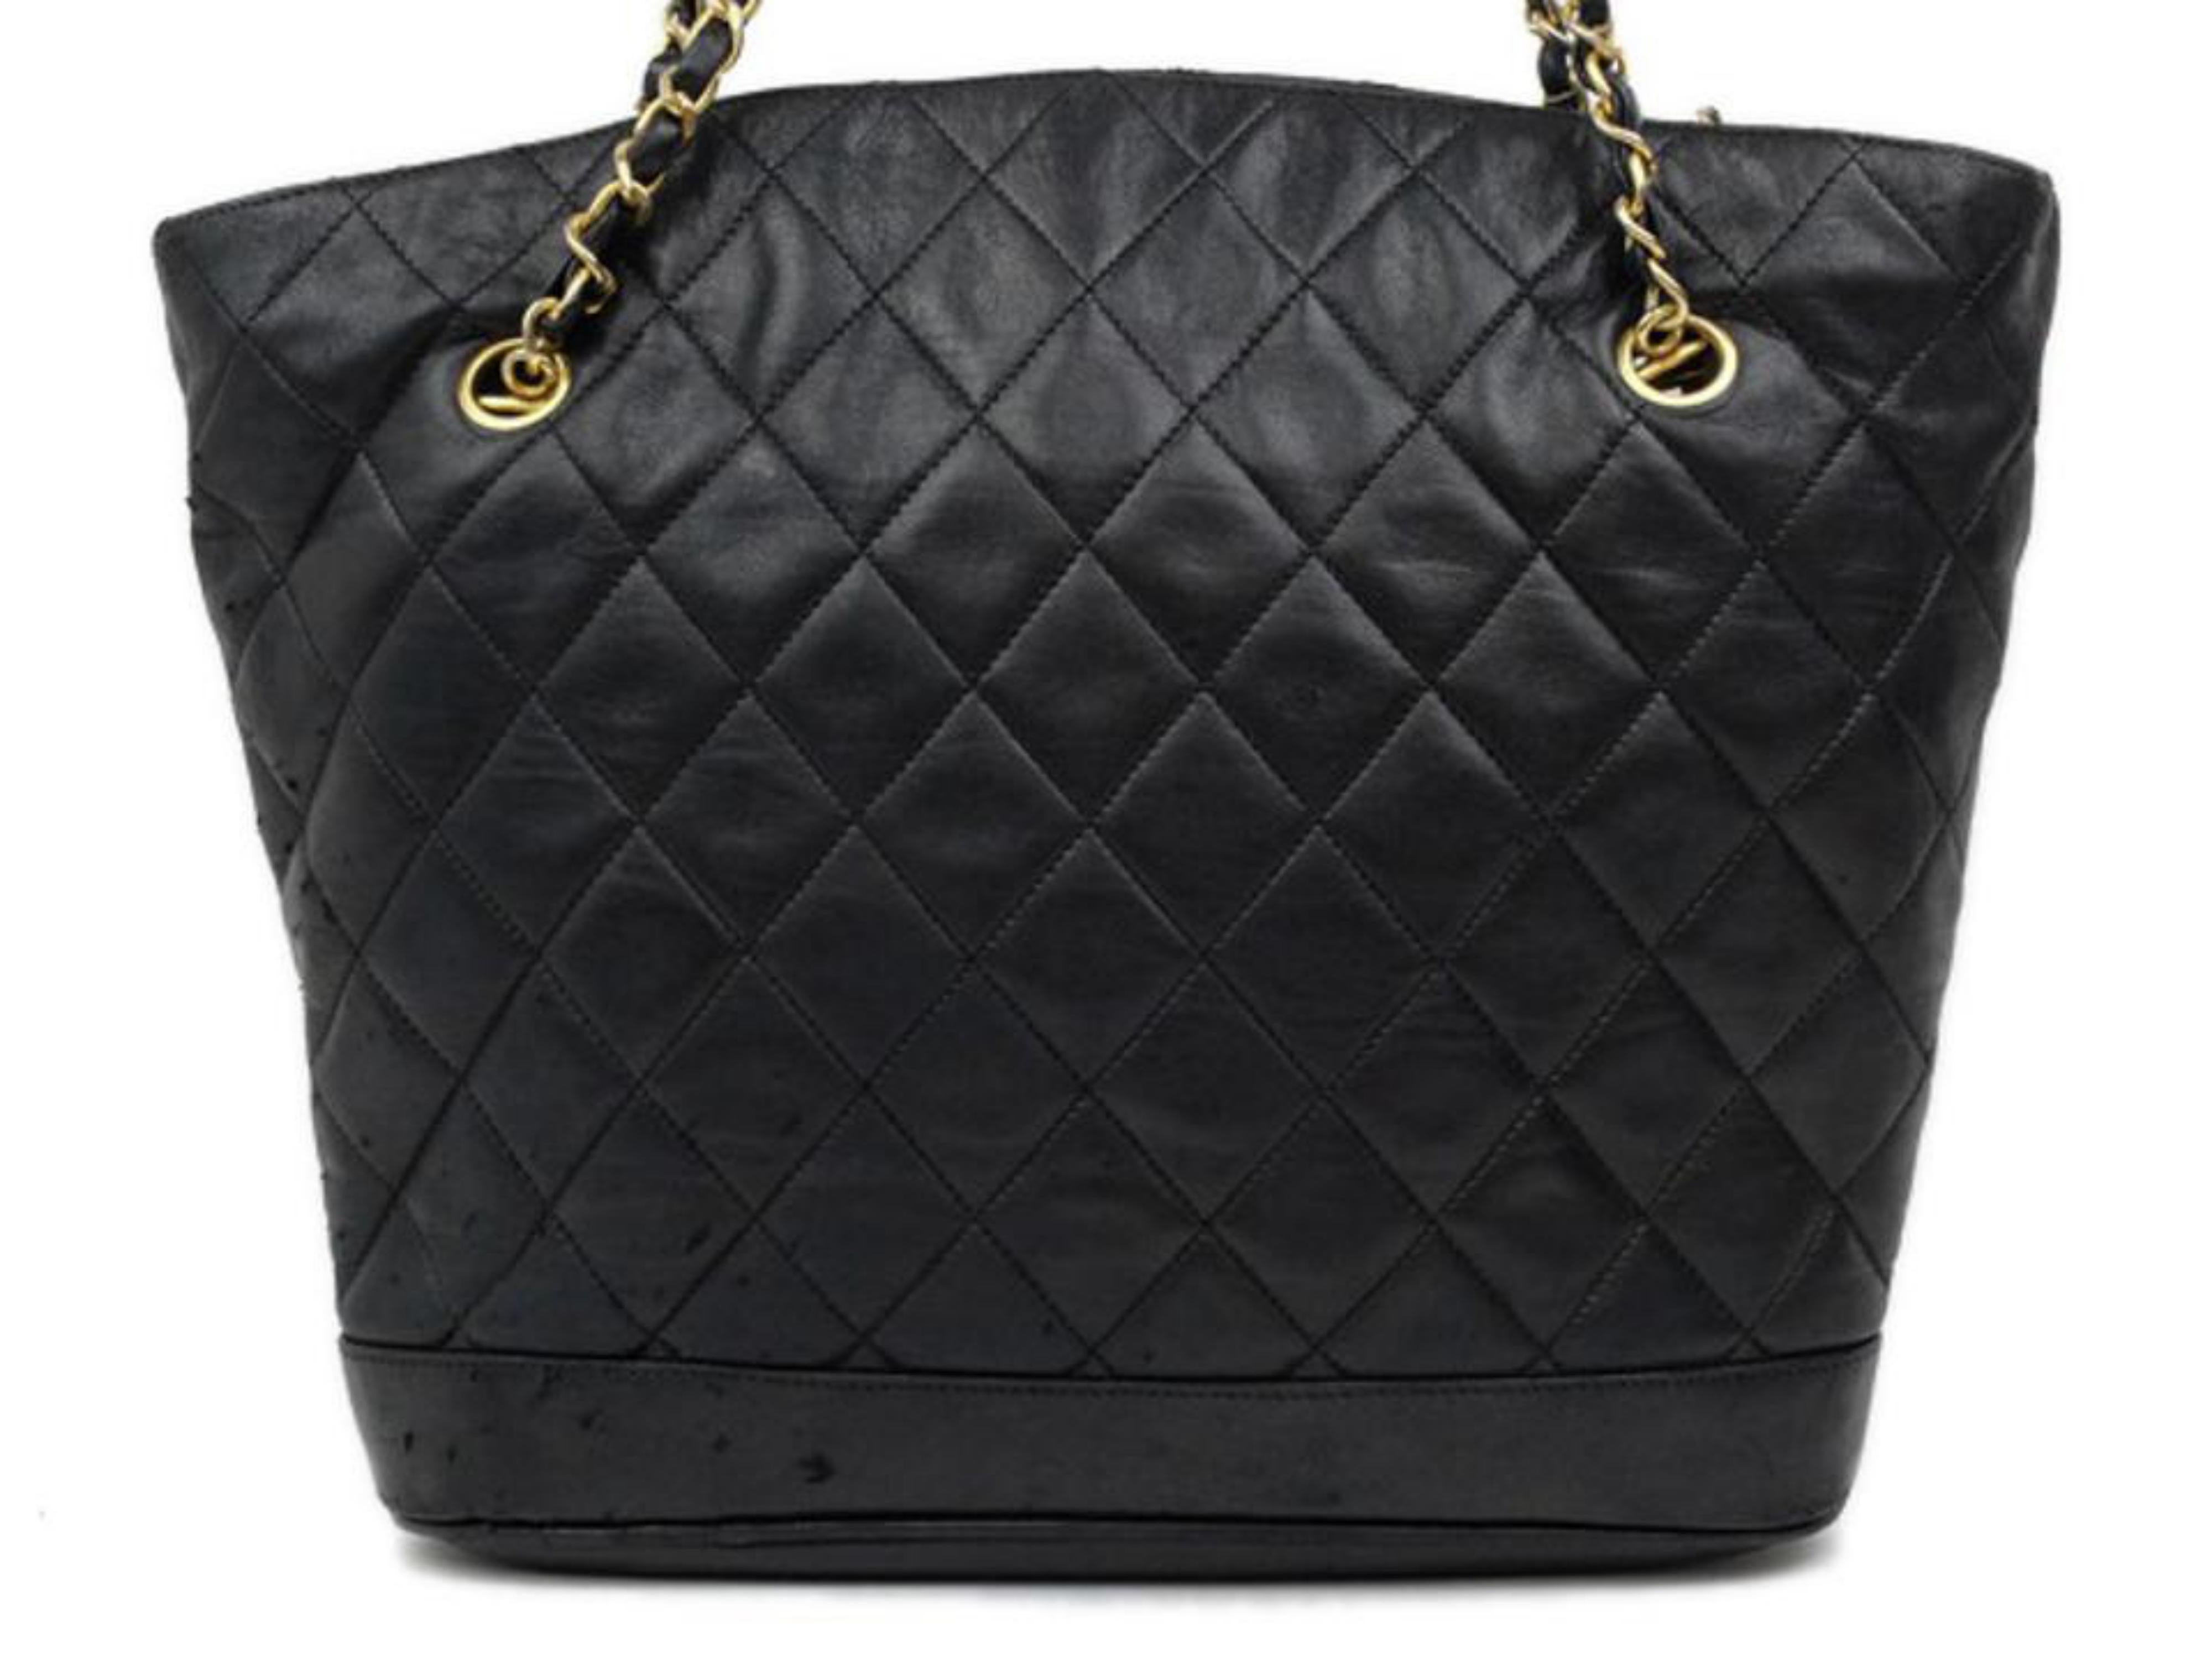 Chanel Quilted Lambskin Chain Tote 221034 Black Leather Shoulder Bag For Sale 2